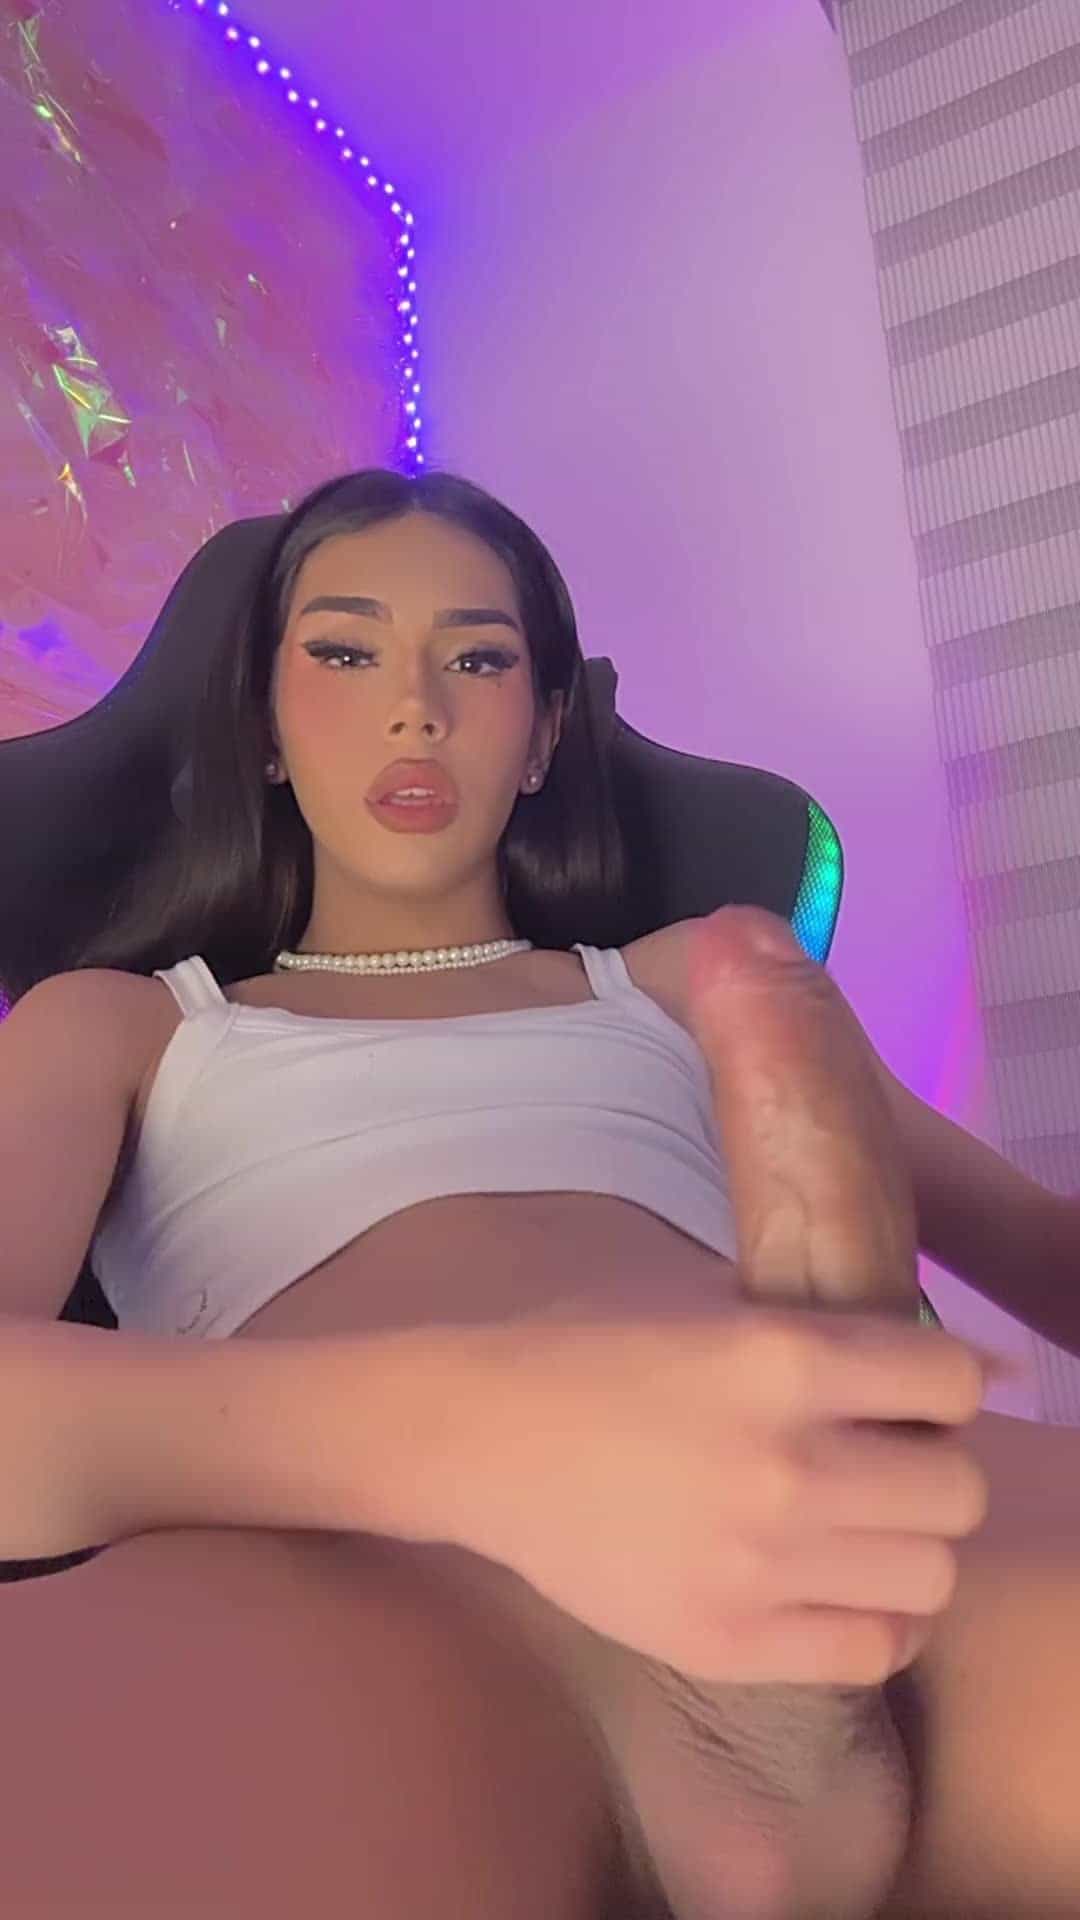 Is my dick too small or the perfect size for you to suck on? 🥵